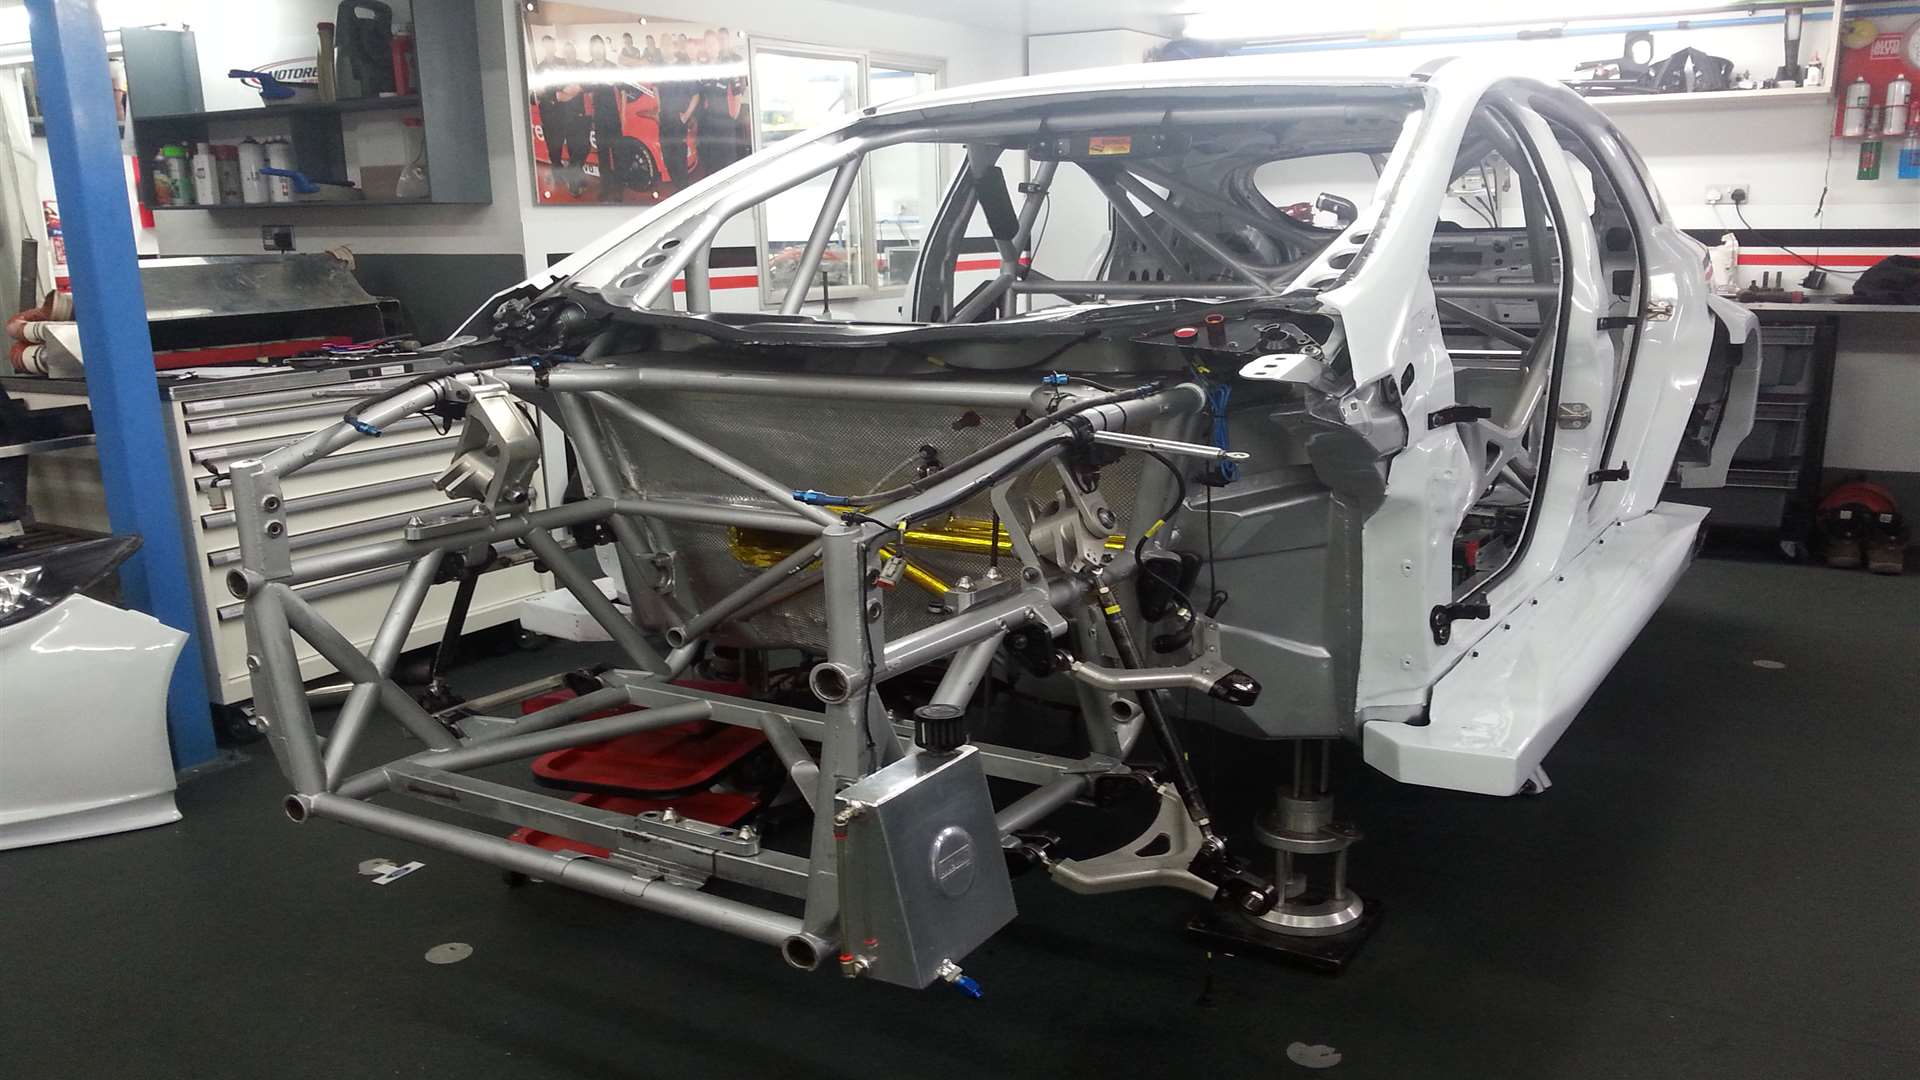 Mat Jackson's Ford Focus is almost unrecognisable in the workshop